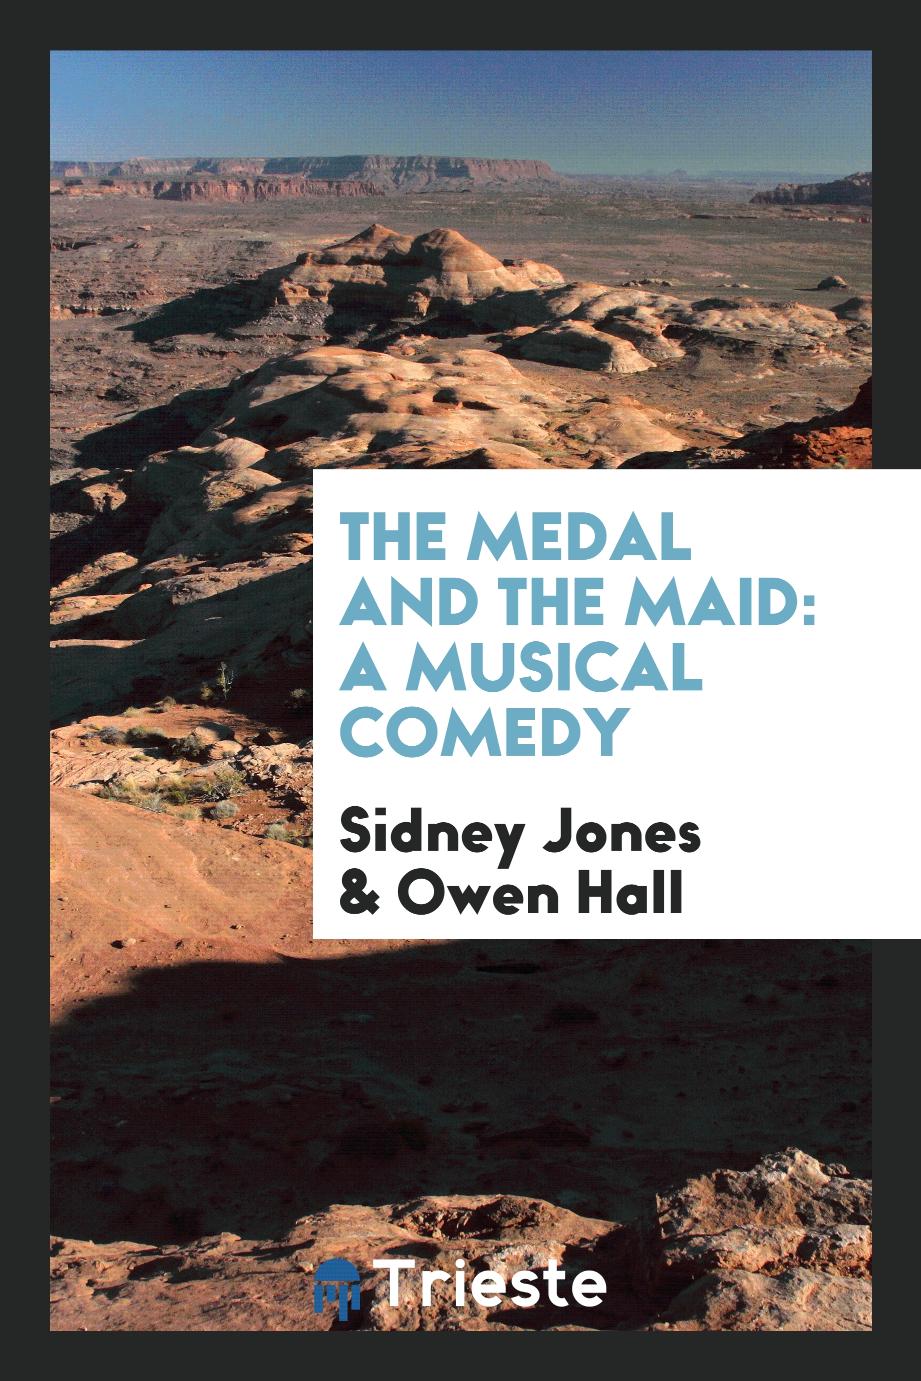 The Medal and the Maid: A Musical Comedy